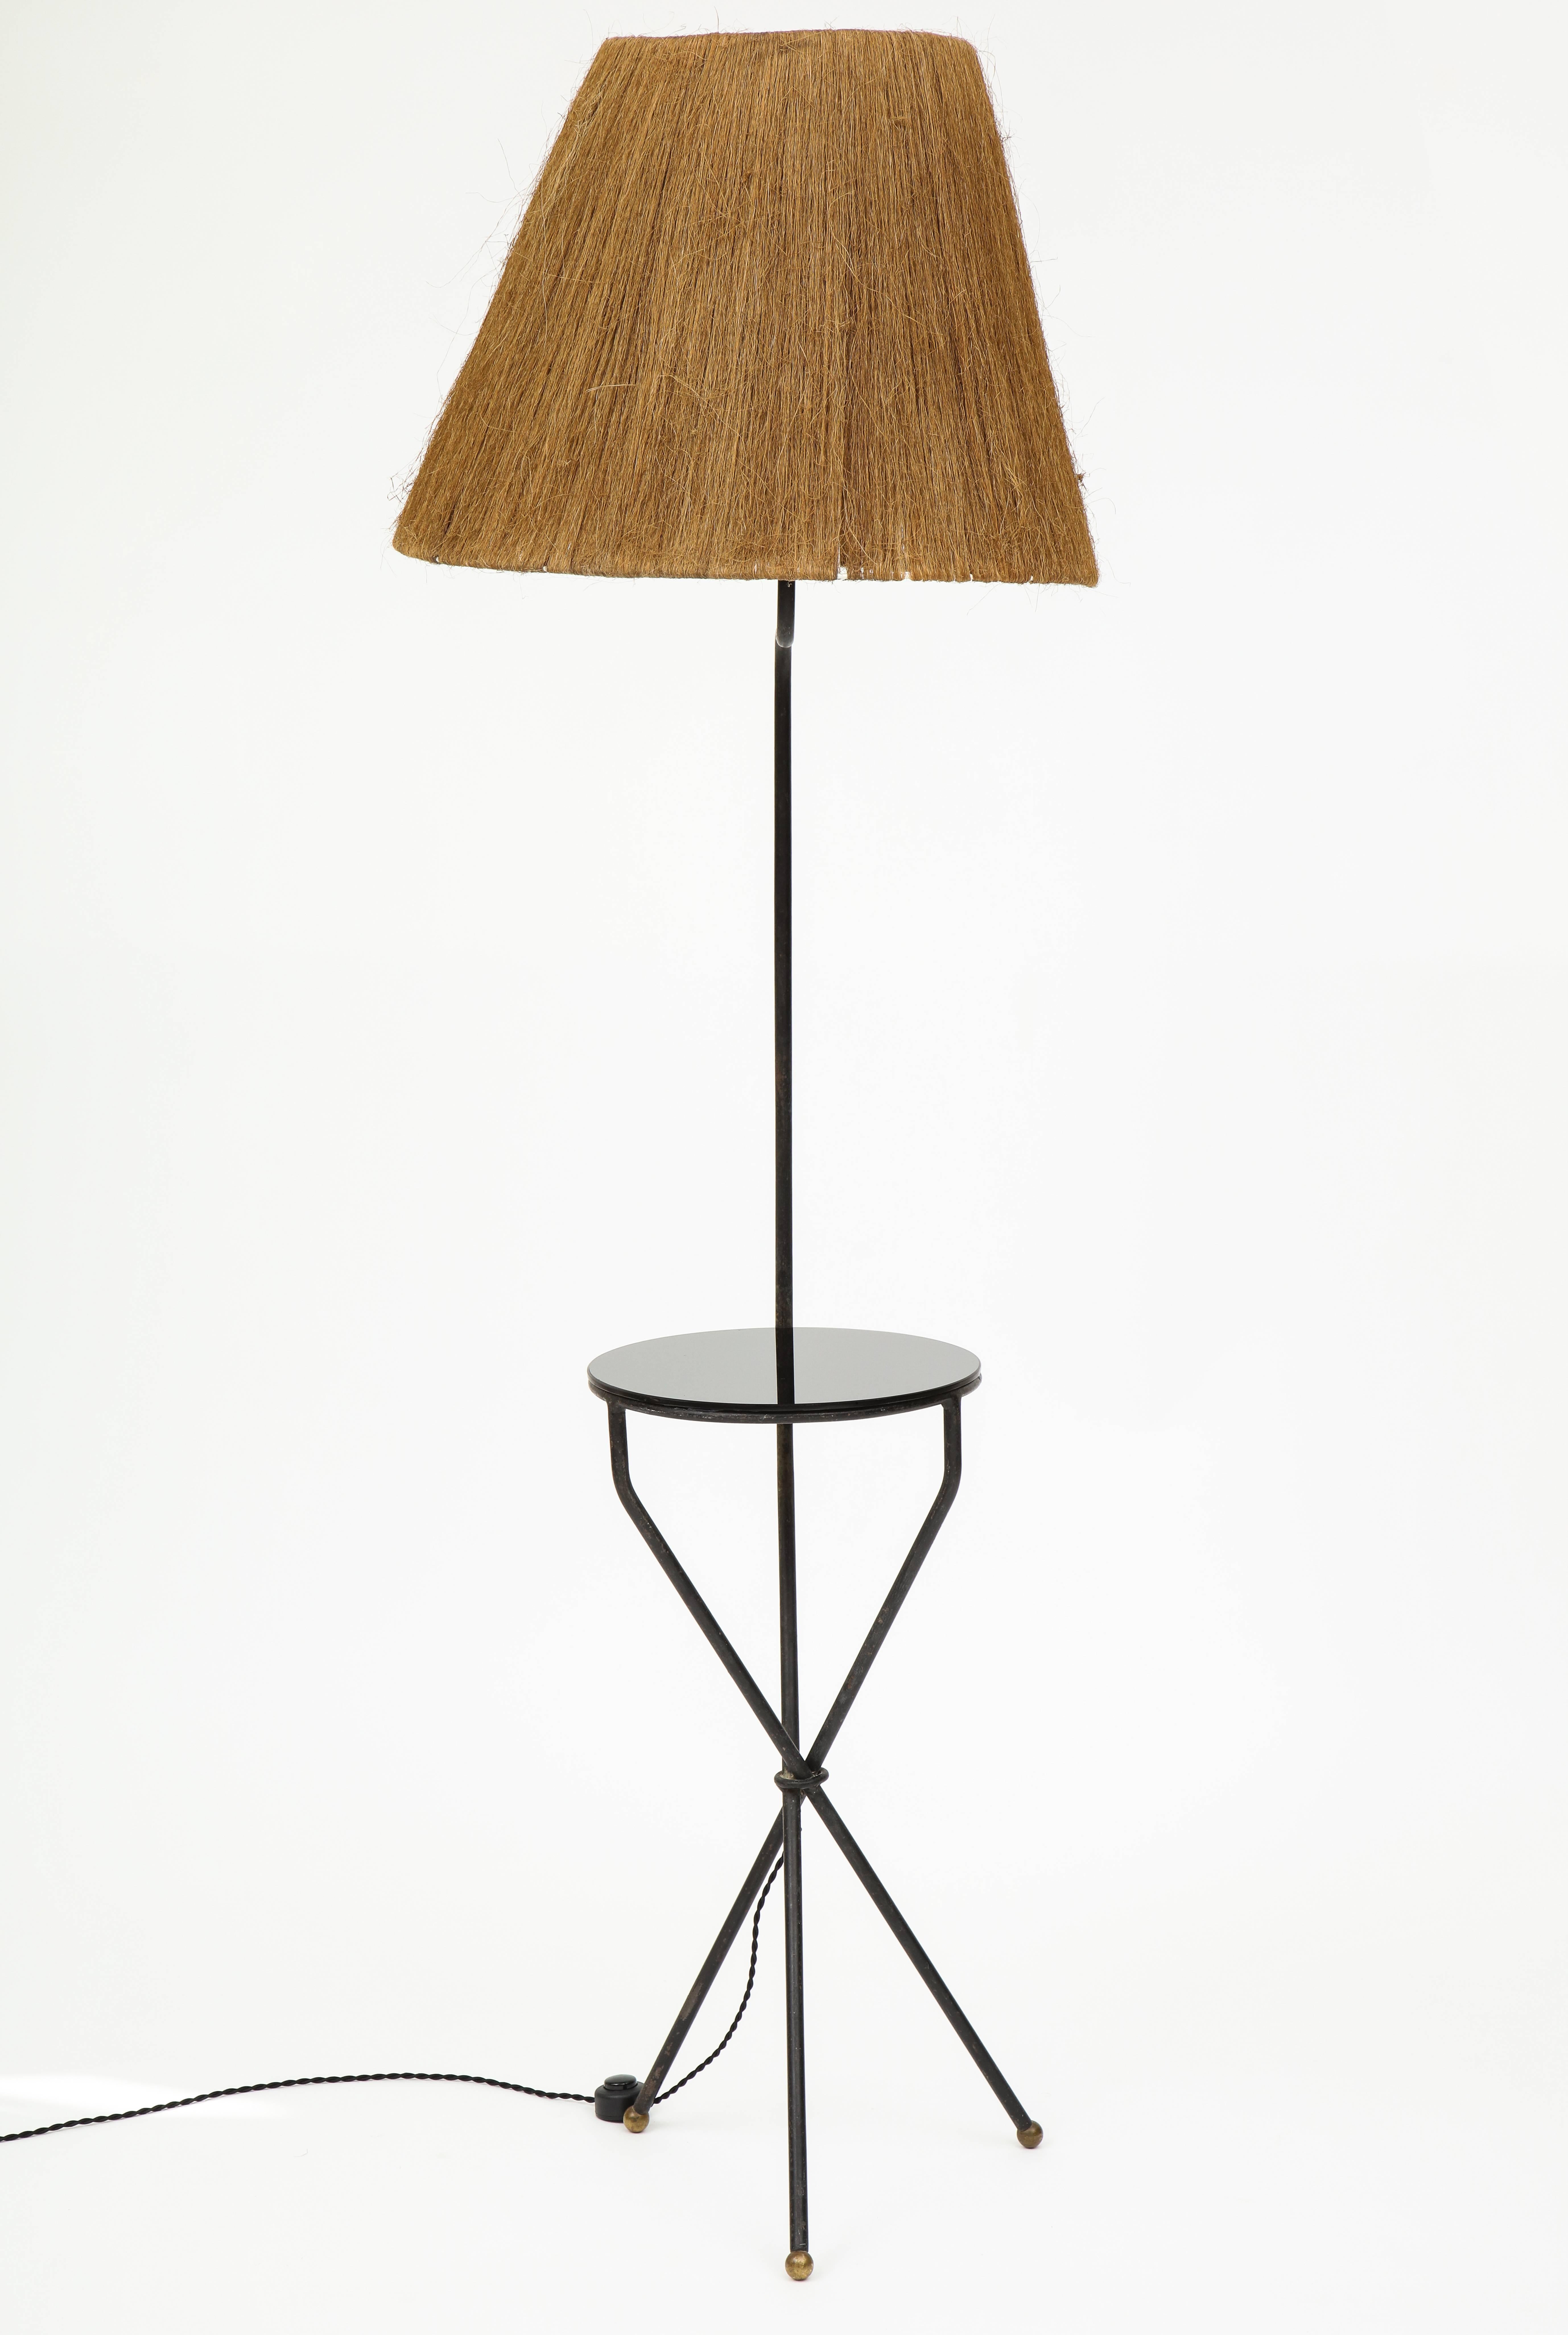 French tripod iron and glass black floor lamp with horsehair lampshade, 1950-1960

Beautiful floor lamp in original vintage condition. It is made out of iron and has detailed brass feet. The mirror table portion is black mirror. The lampshade is